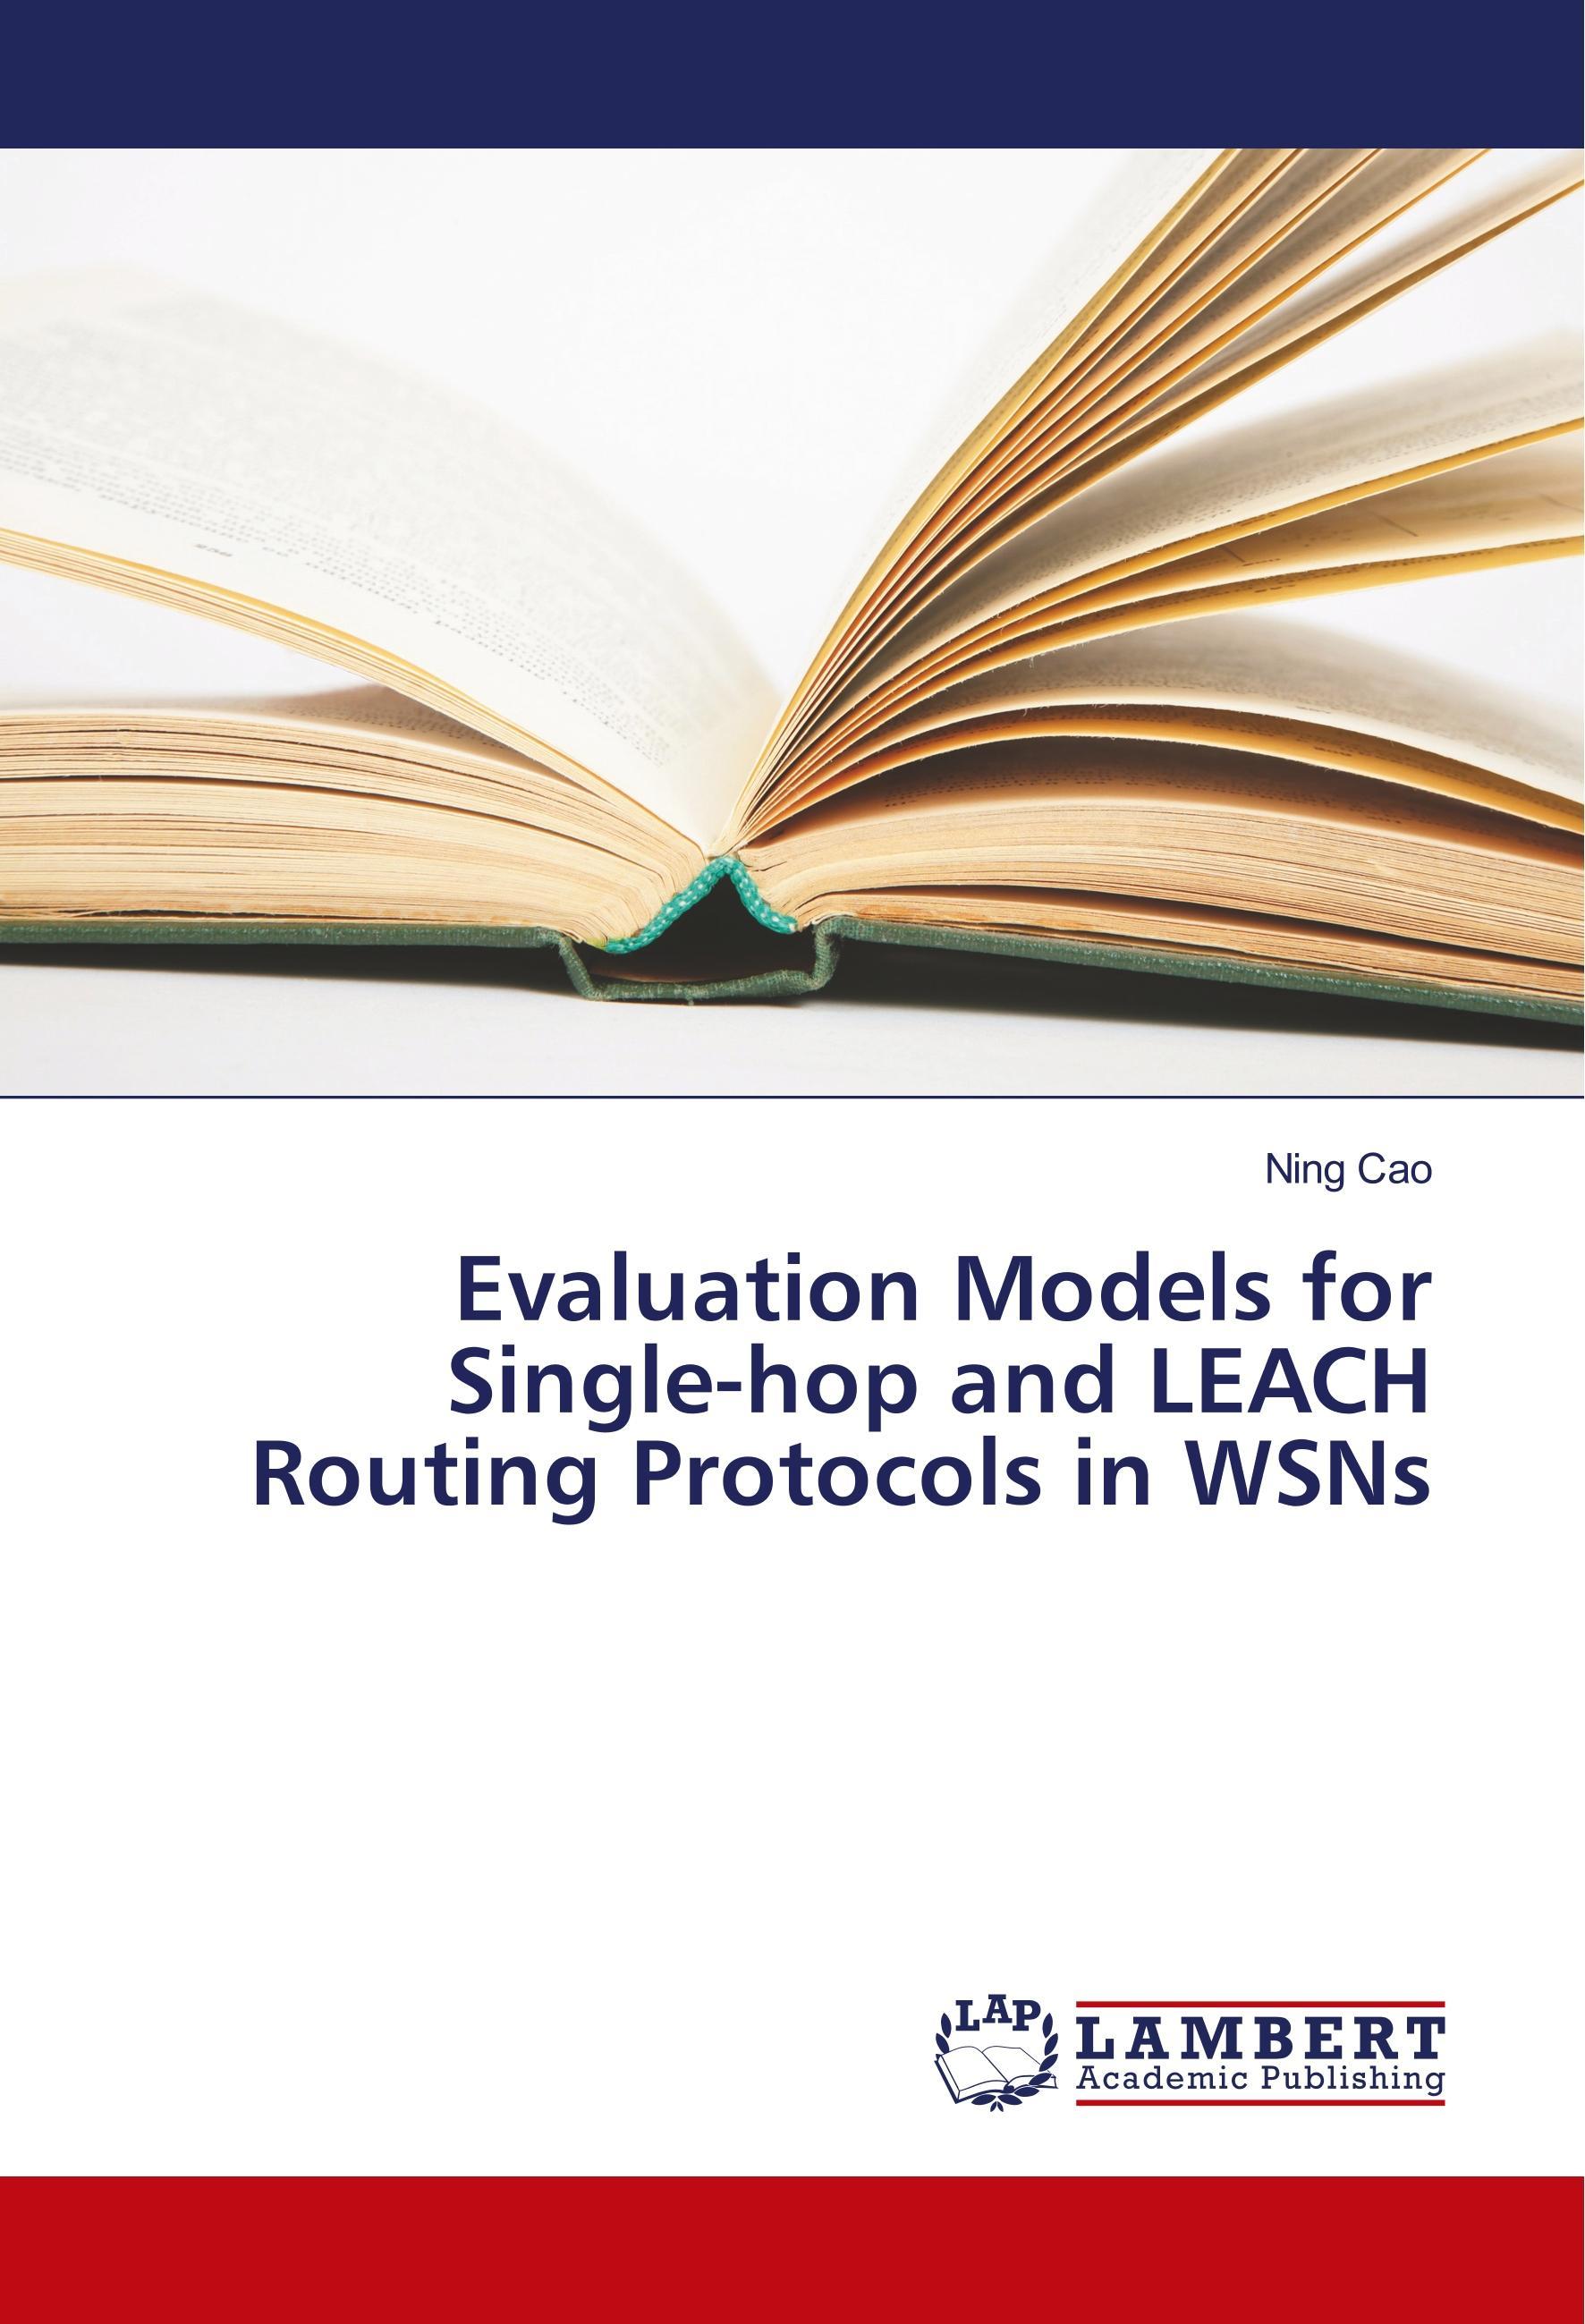 Evaluation Models for Single-hop and LEACH Routing Protocols in WSNs - Cao, Ning